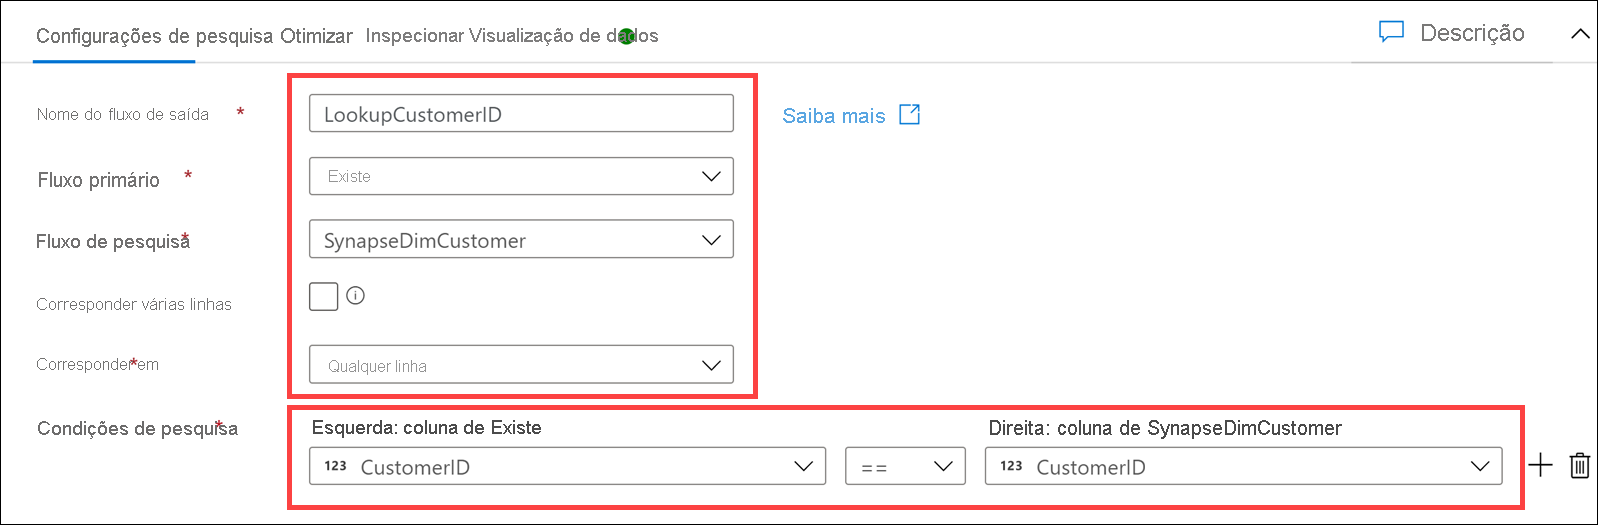 The Lookup settings form is configured as described.